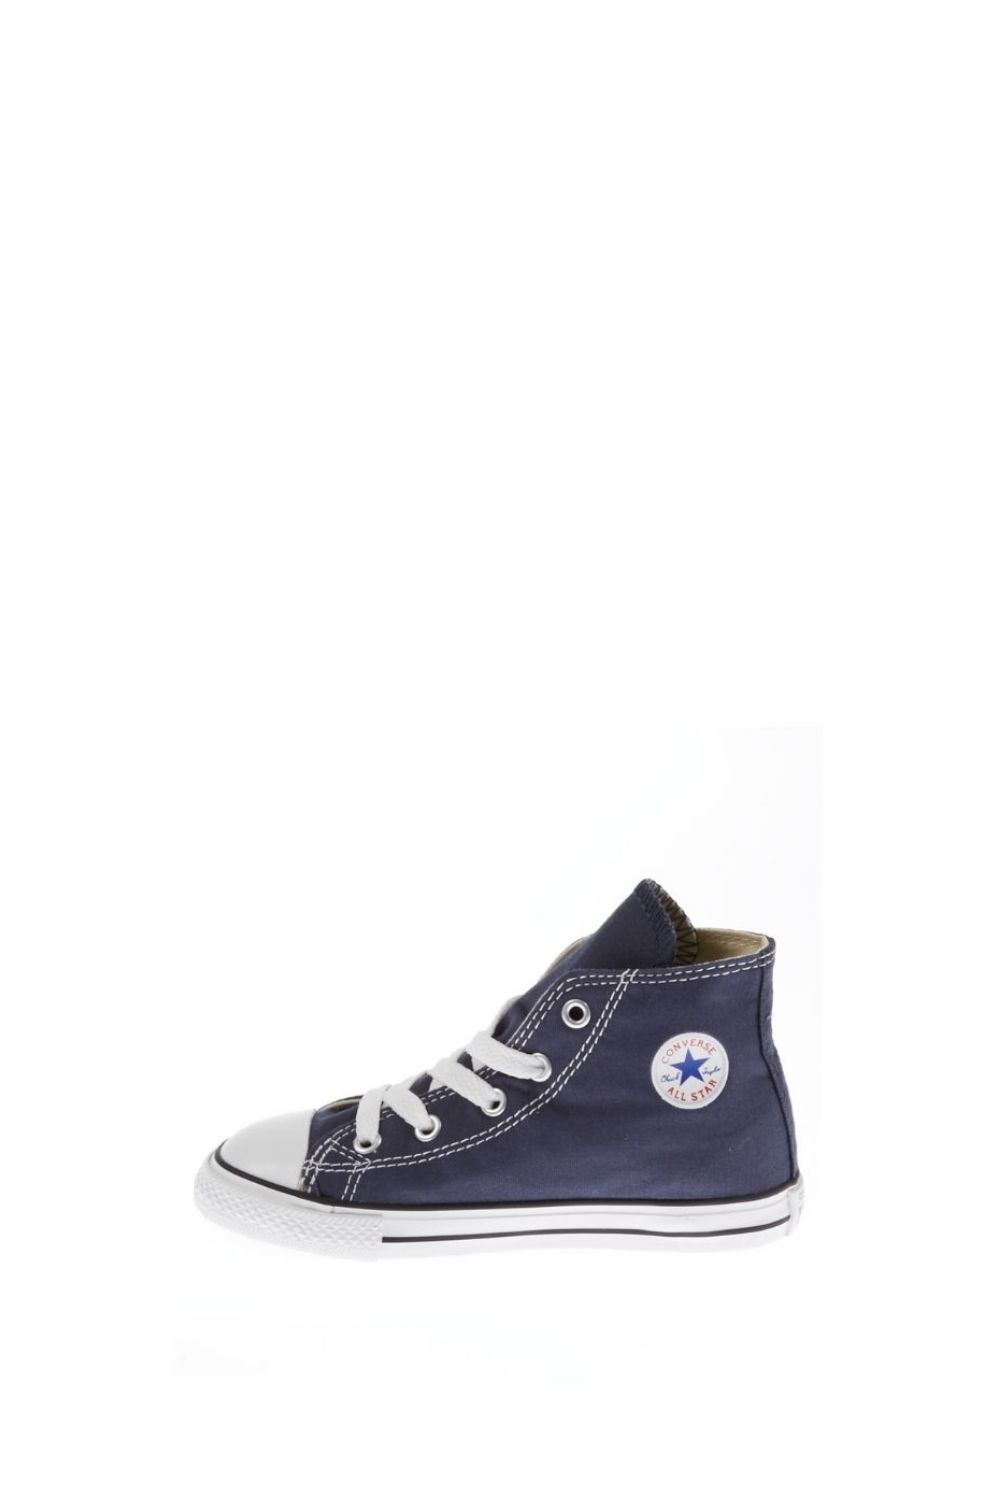 CONVERSE - Βρεφικά μποτάκια Chuck Taylor μπλε Παιδικά/Baby/Παπούτσια/Sneakers